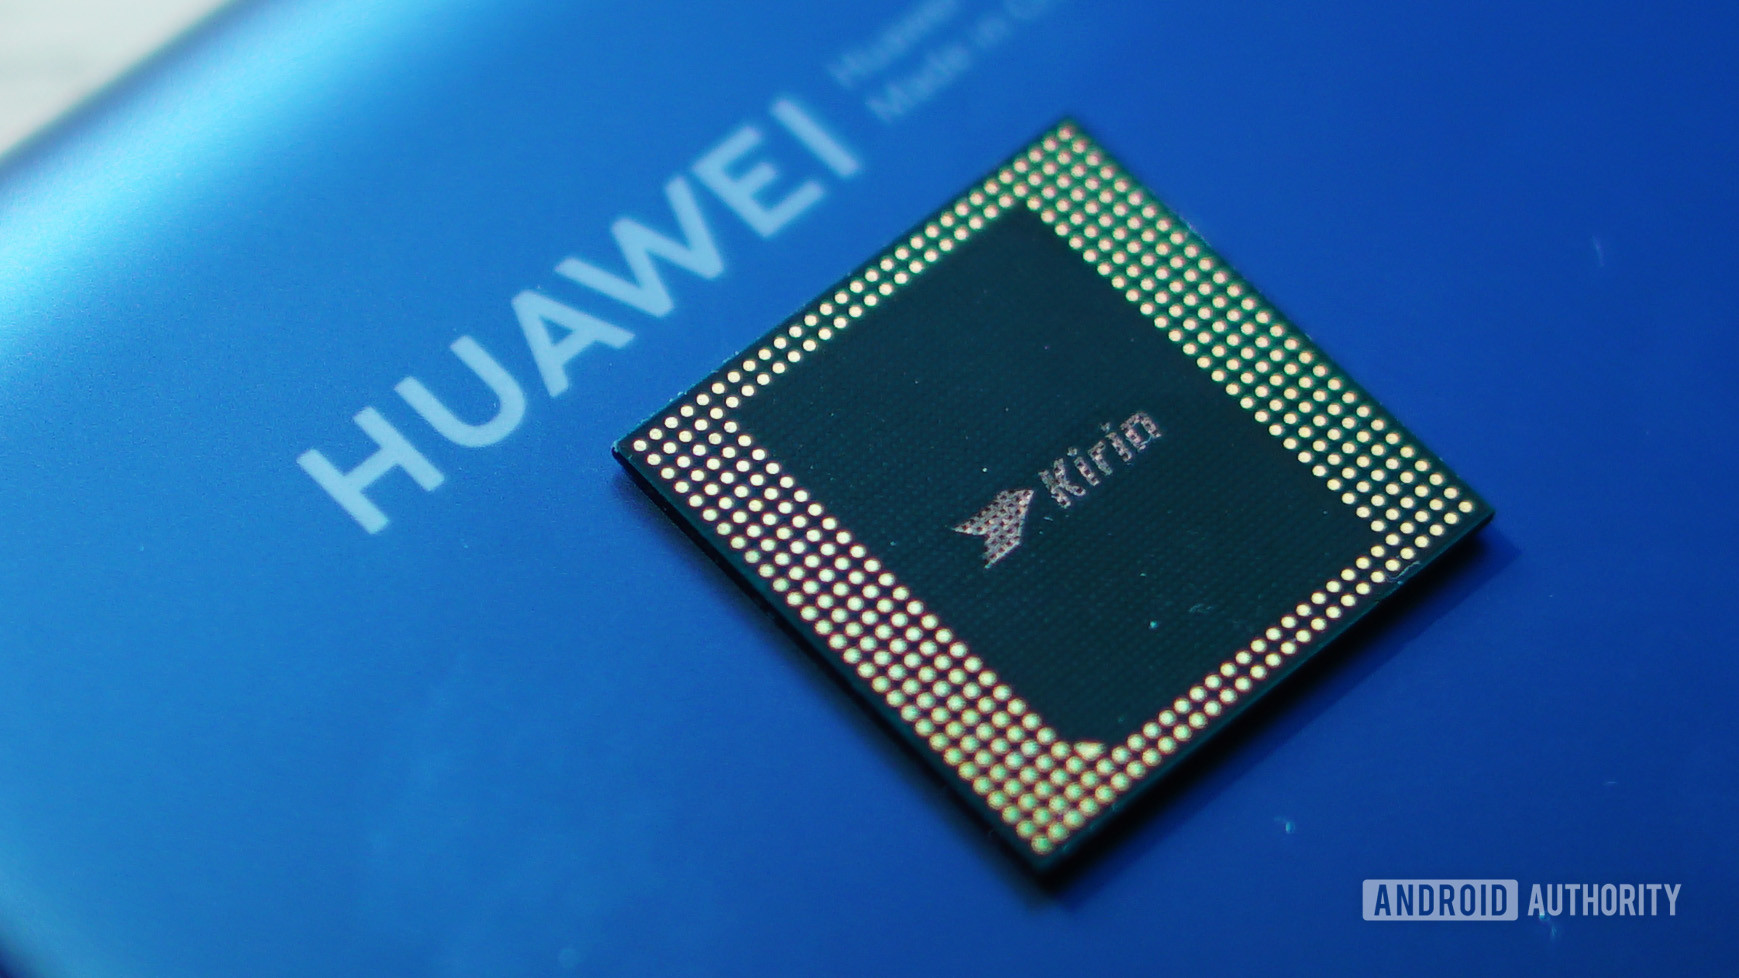 The Kirin 990 is set to be joined by more Huawei chipsets next year, powering cheap 5G phones.